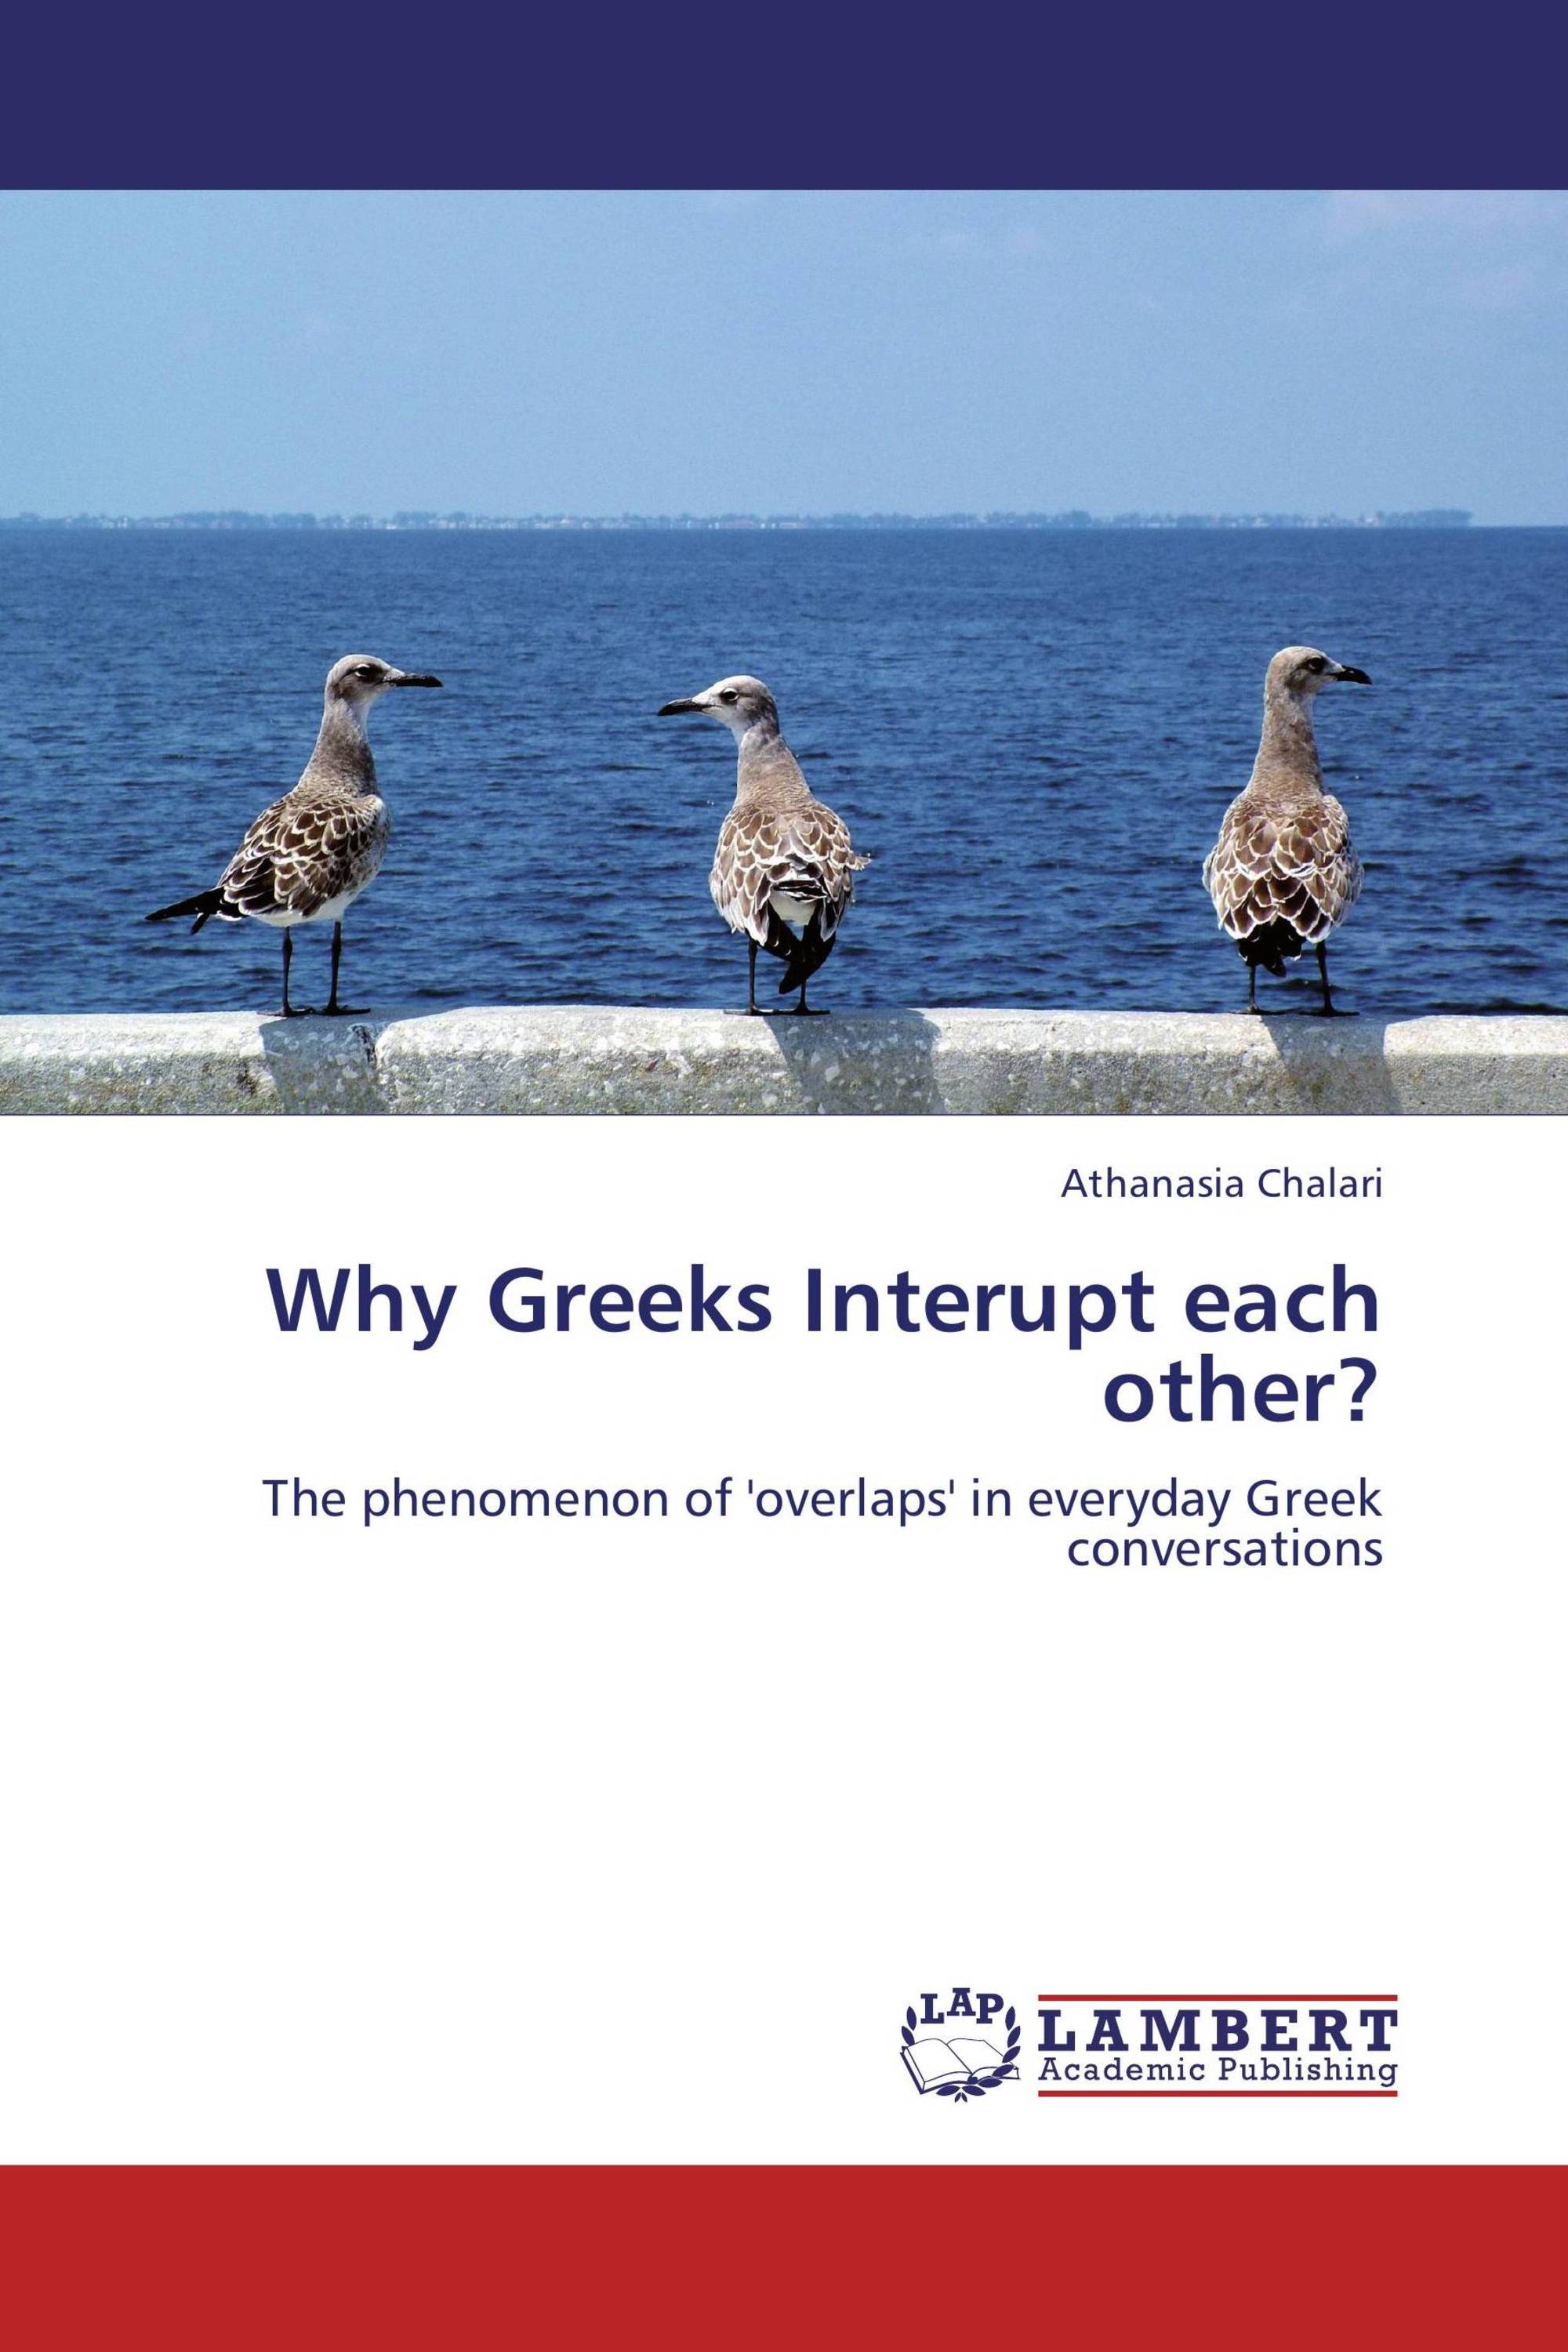 Why Greeks Interupt each other?